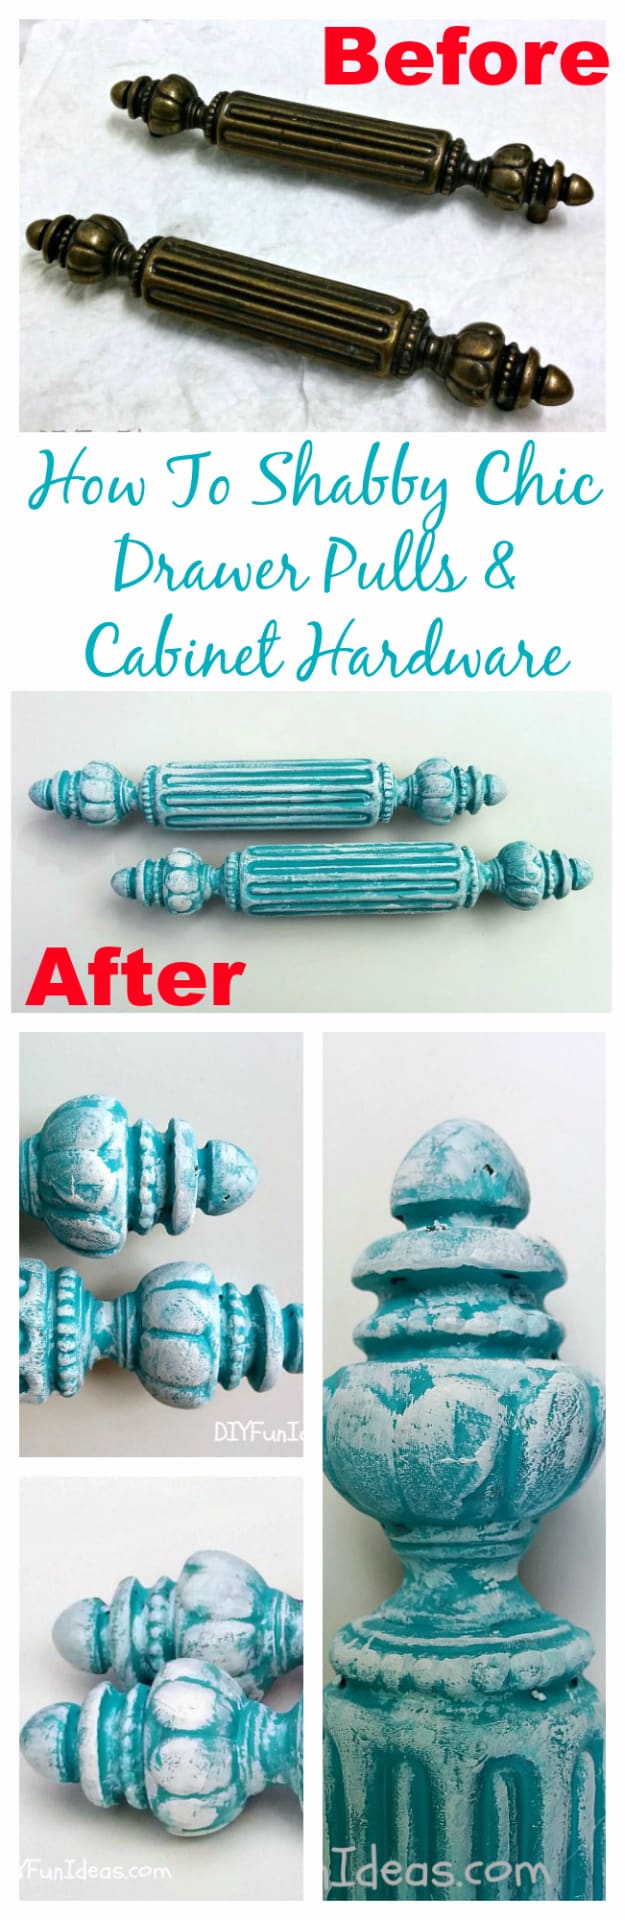 Shabby Chic Decor and Bedding Ideas - Shabby Chic Antique Cabinet Hardware And Drawer Pulls - Rustic and Romantic Vintage Bedroom, Living Room and Kitchen Country Cottage Furniture and Home Decor Ideas. Step by Step Tutorials and Instructions 